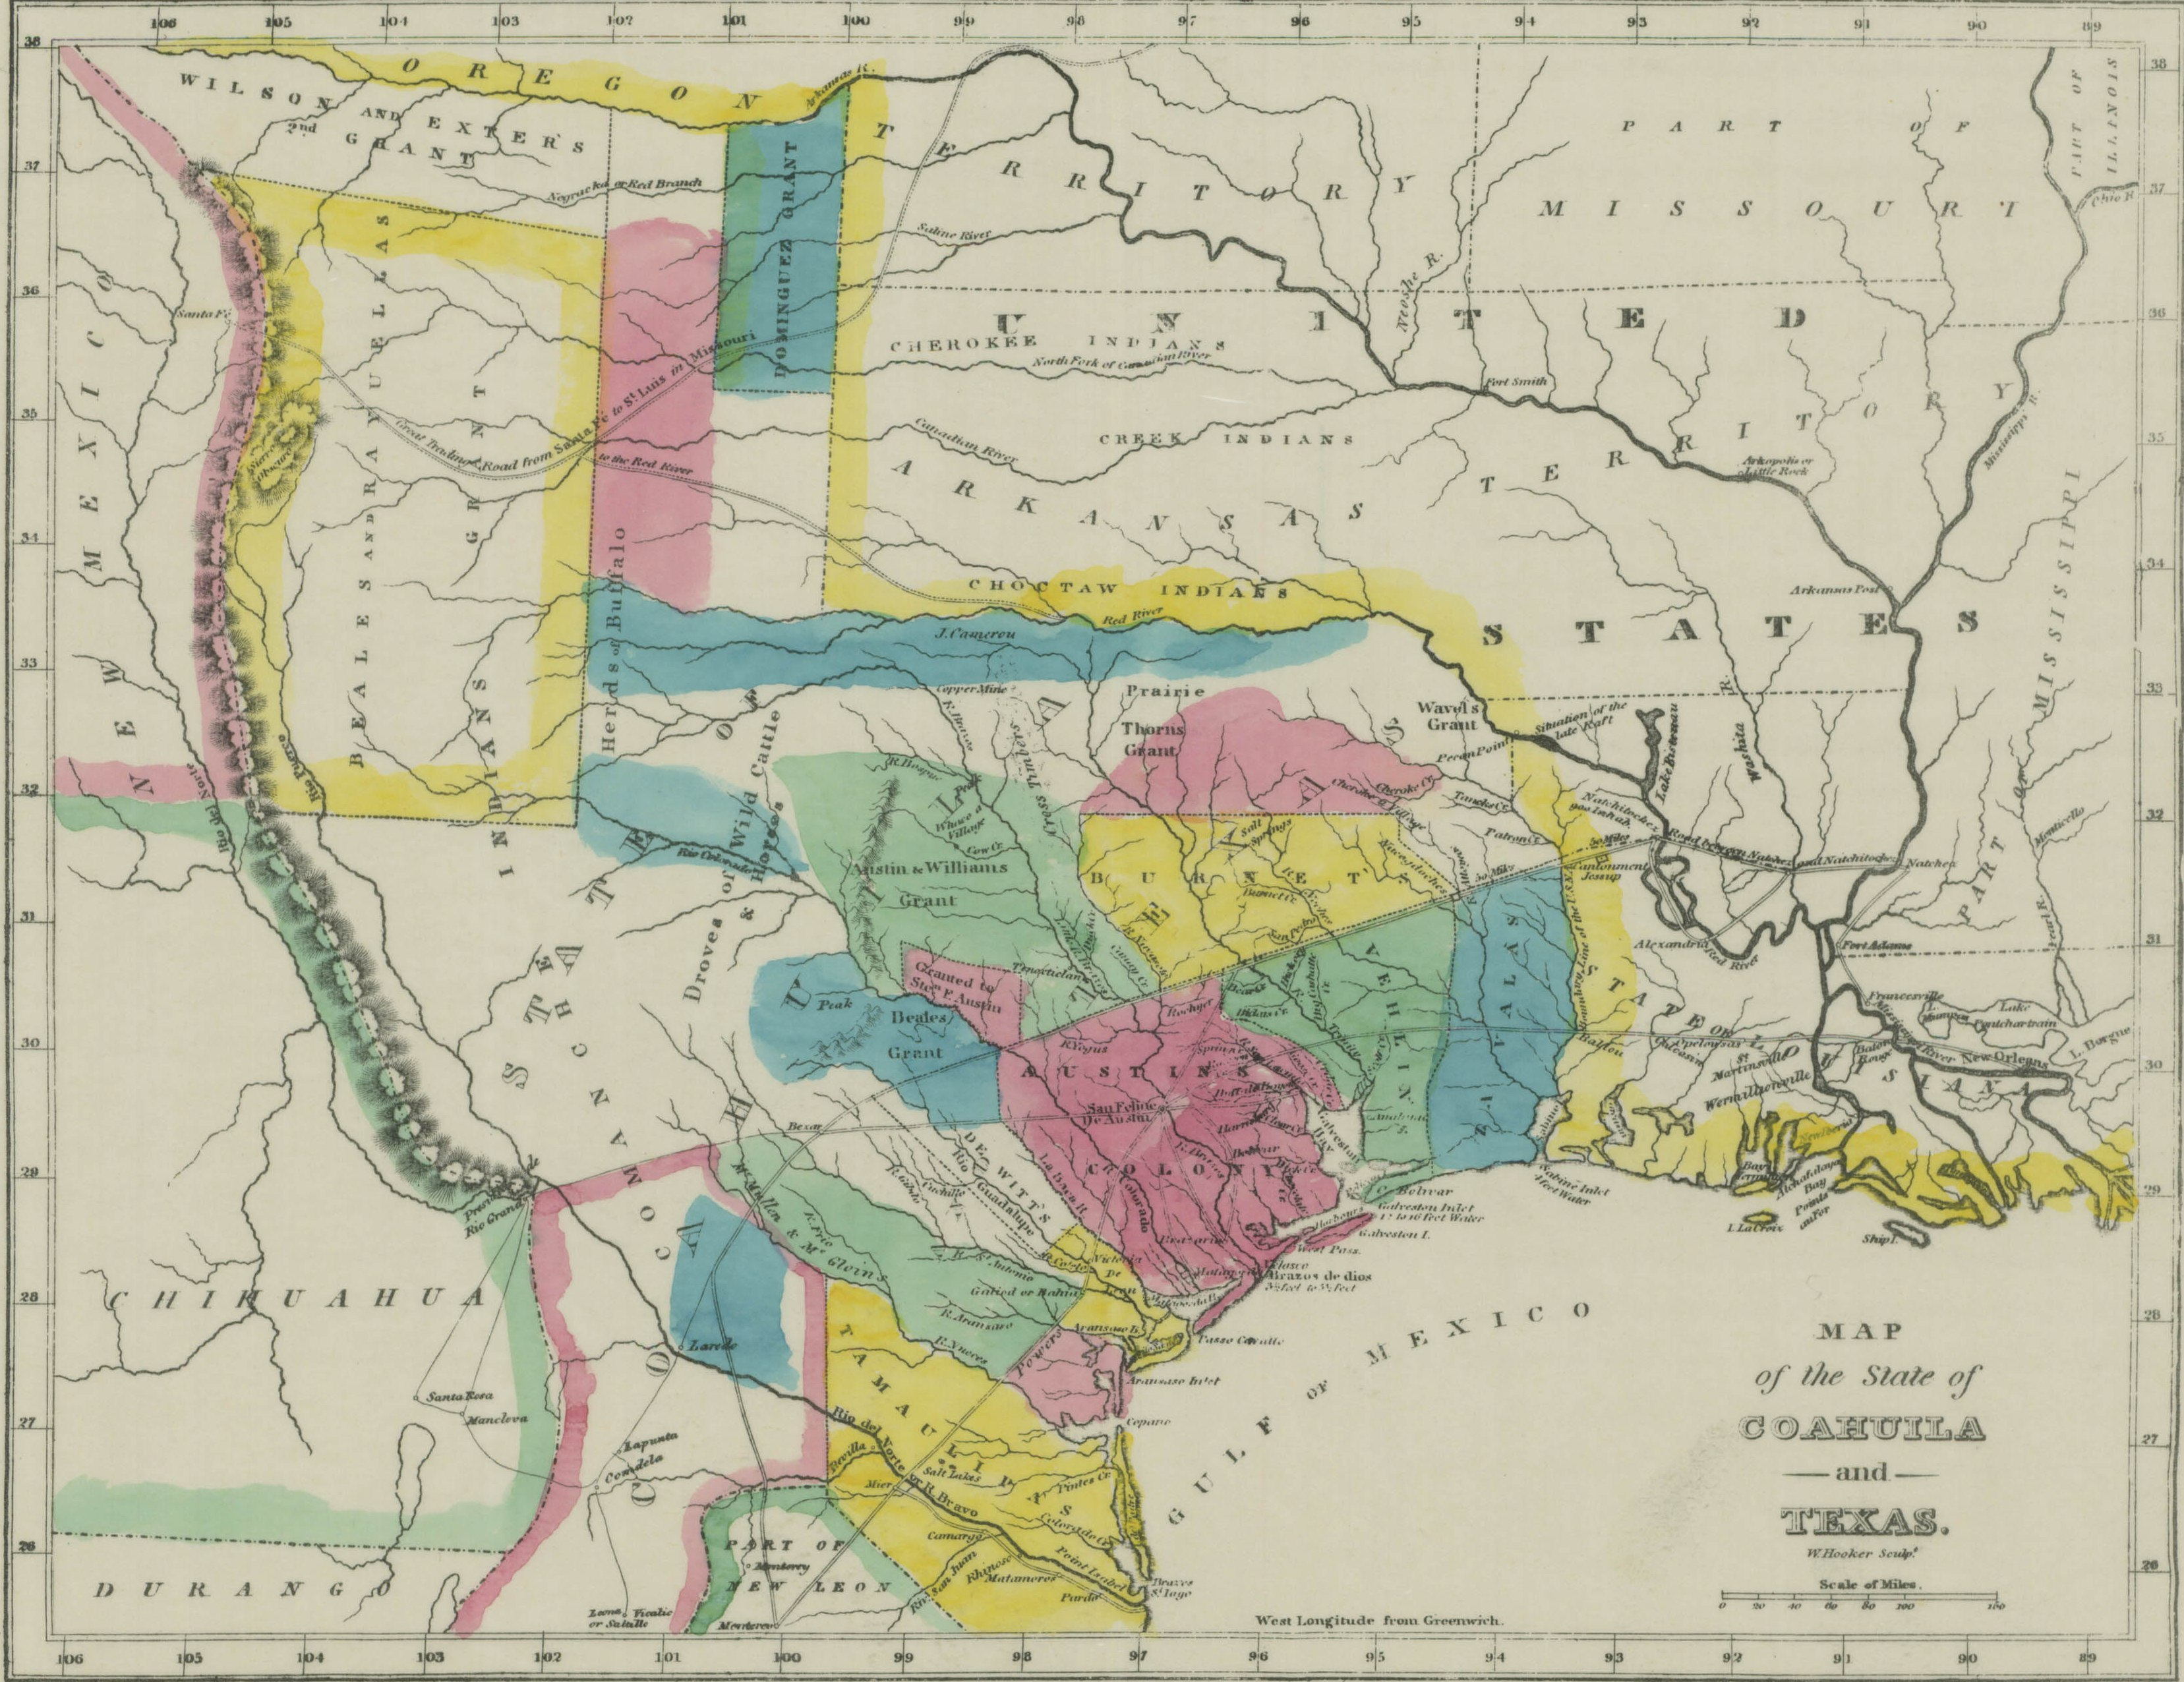 Maps Of Indian Trails In Texas | Texags - Texas Trails Maps